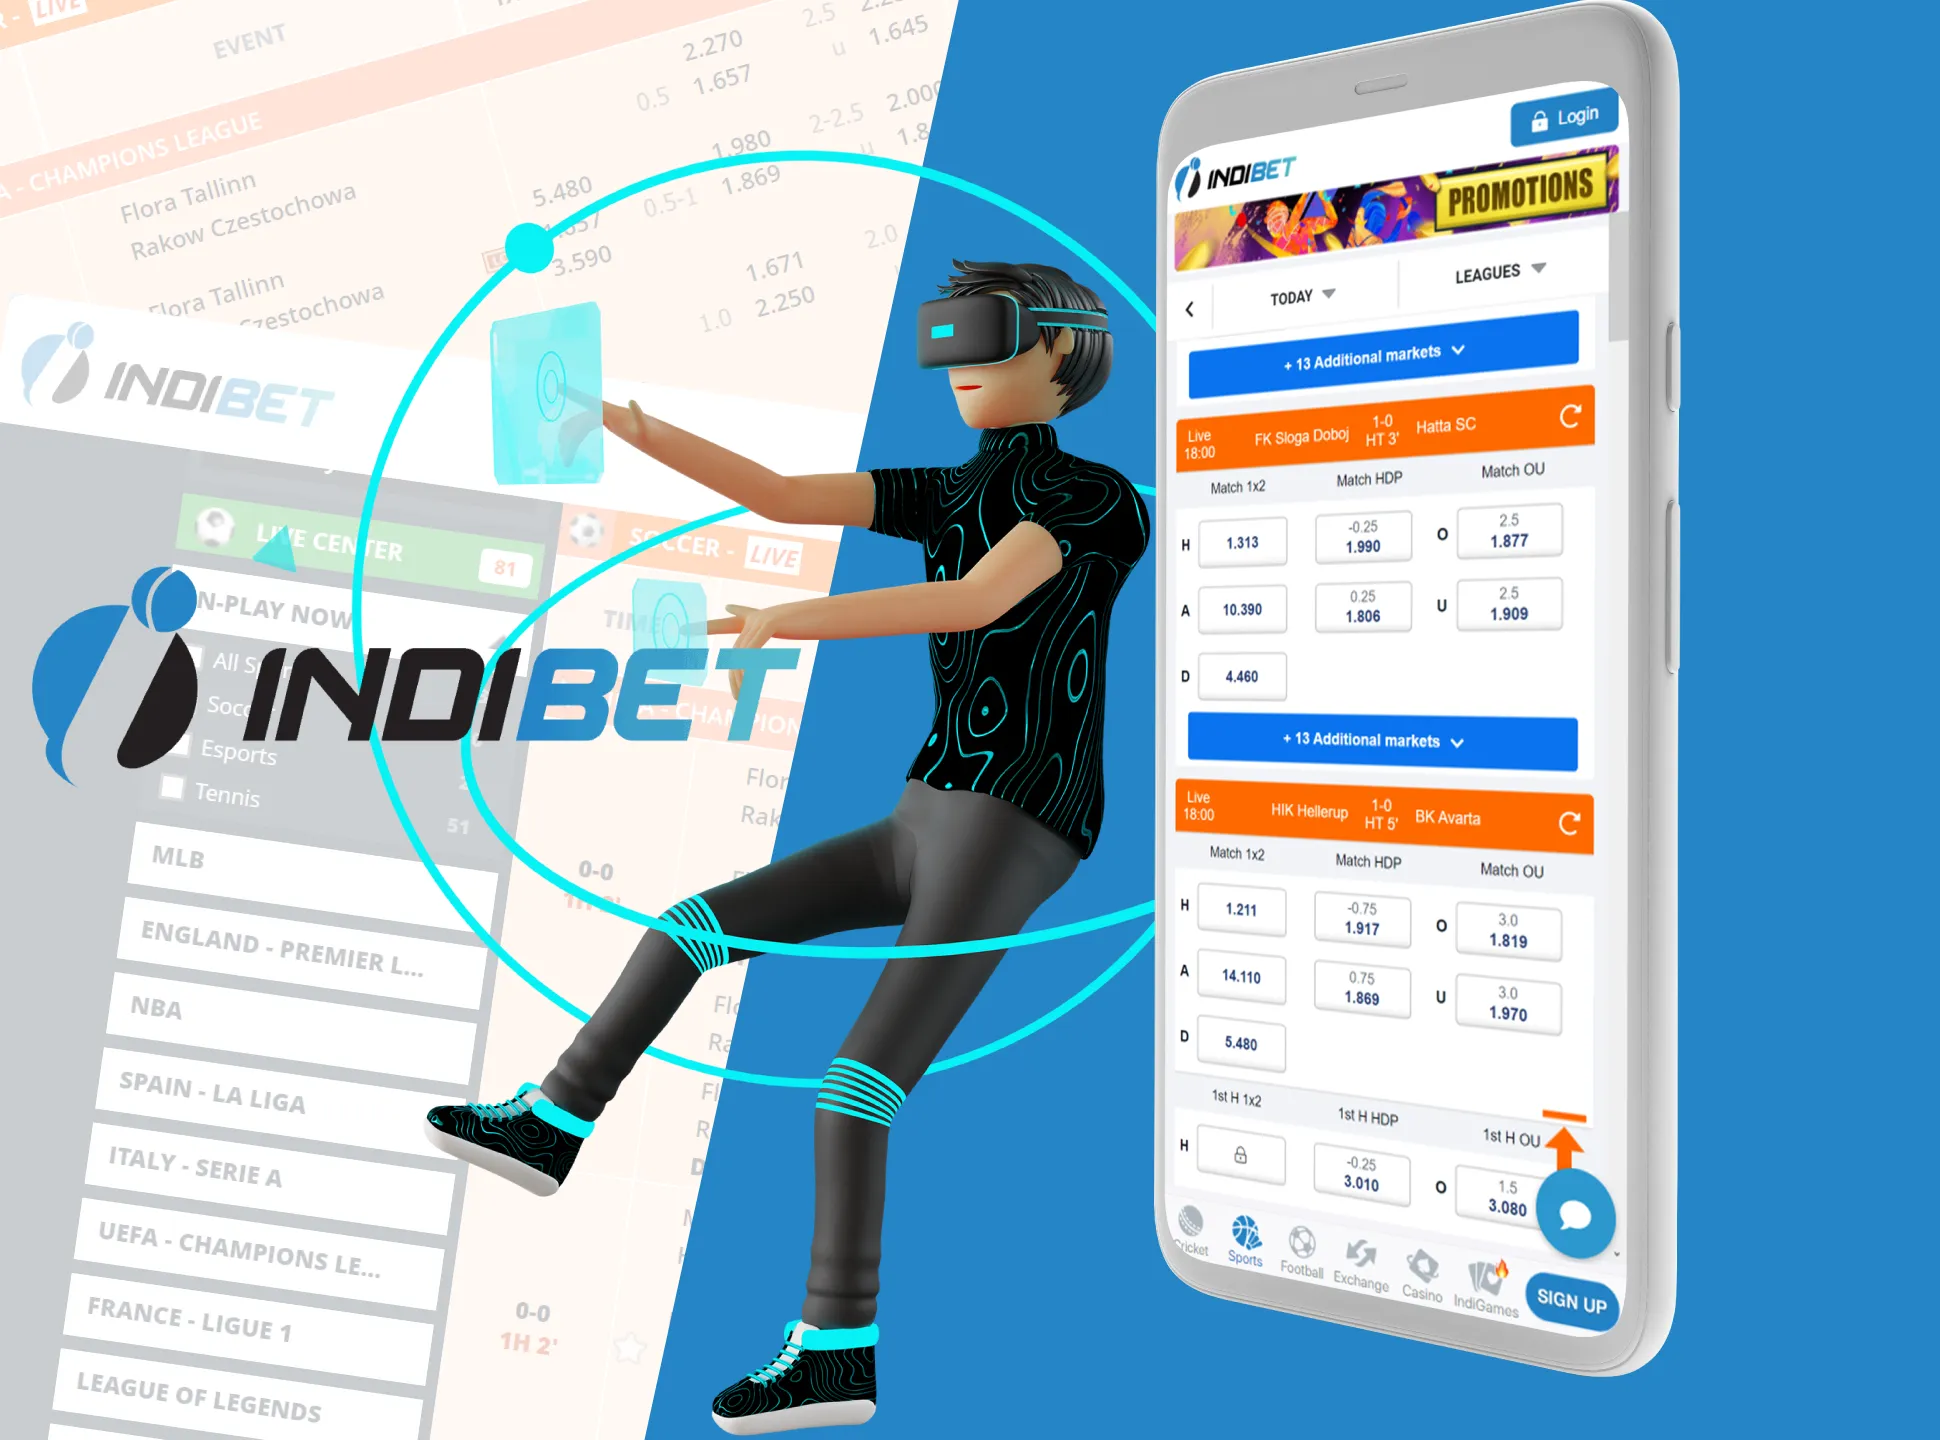 Bet on the most exotic virtual sports in the Indibet app.